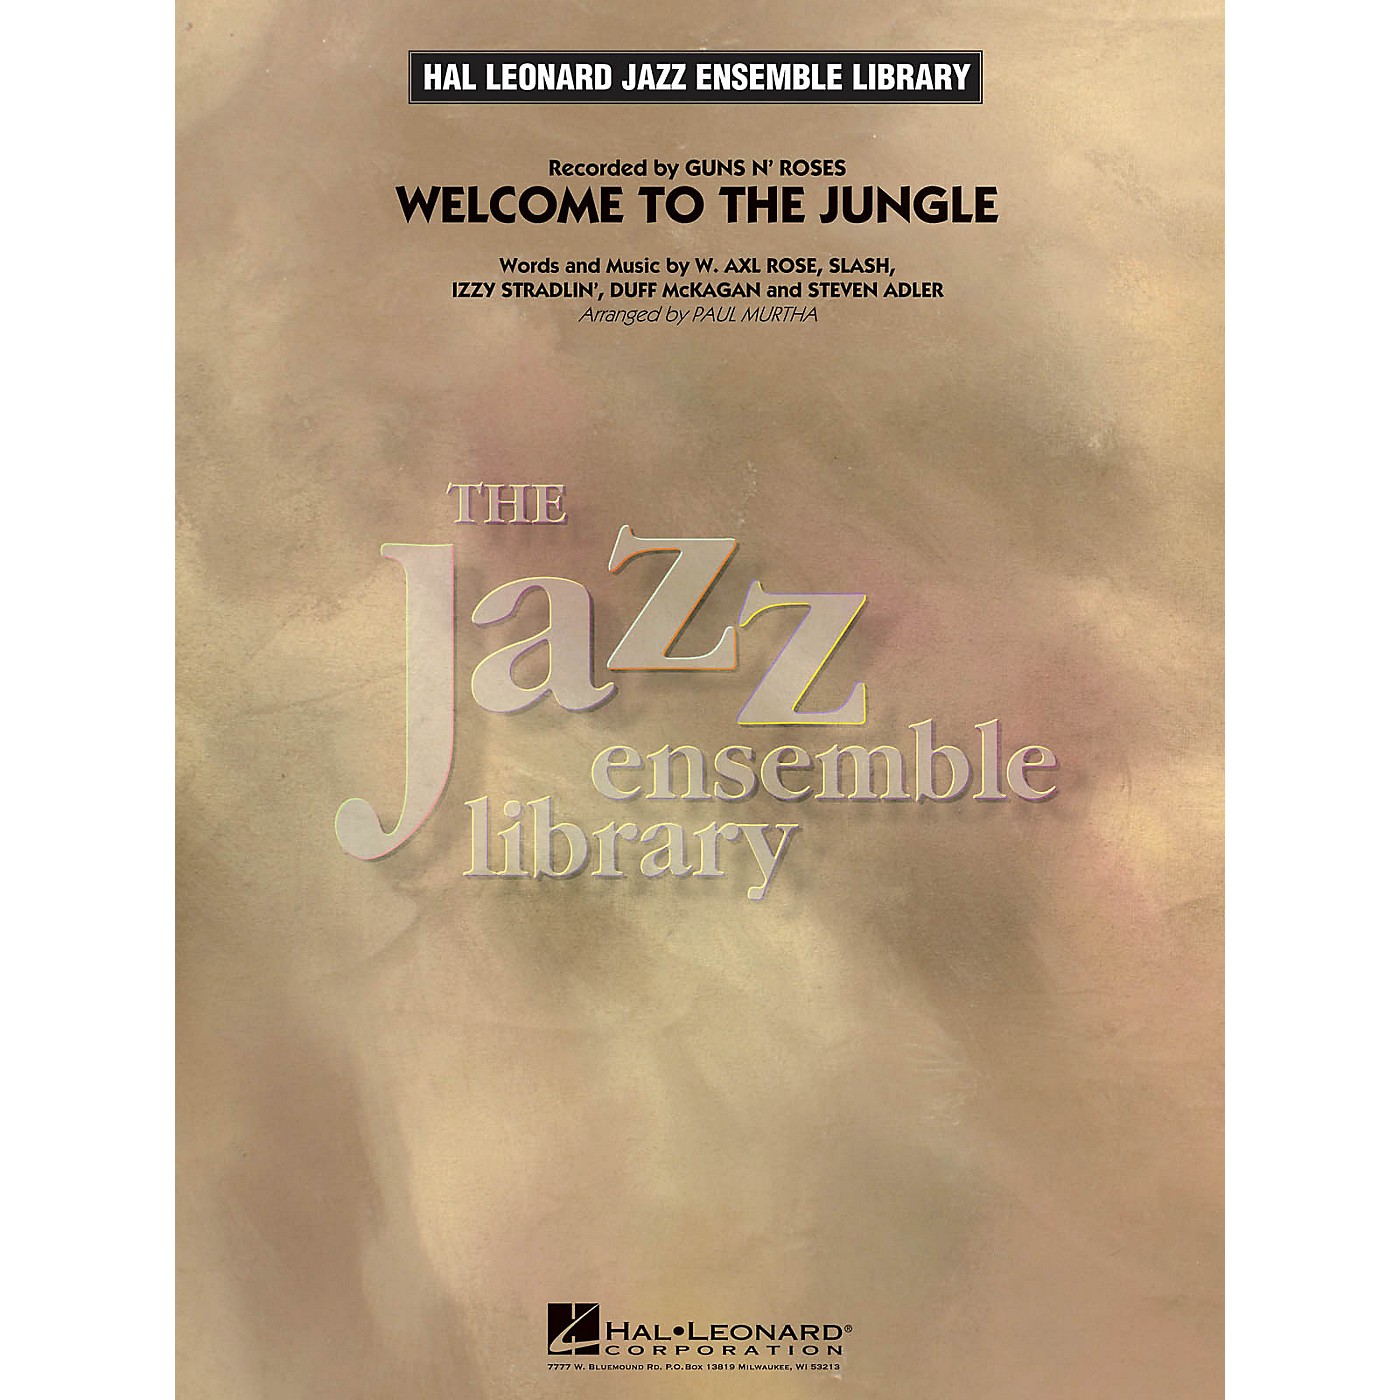 Hal Leonard Welcome to the Jungle Jazz Band Level 4 by Guns N' Roses Arranged by Paul Murtha thumbnail